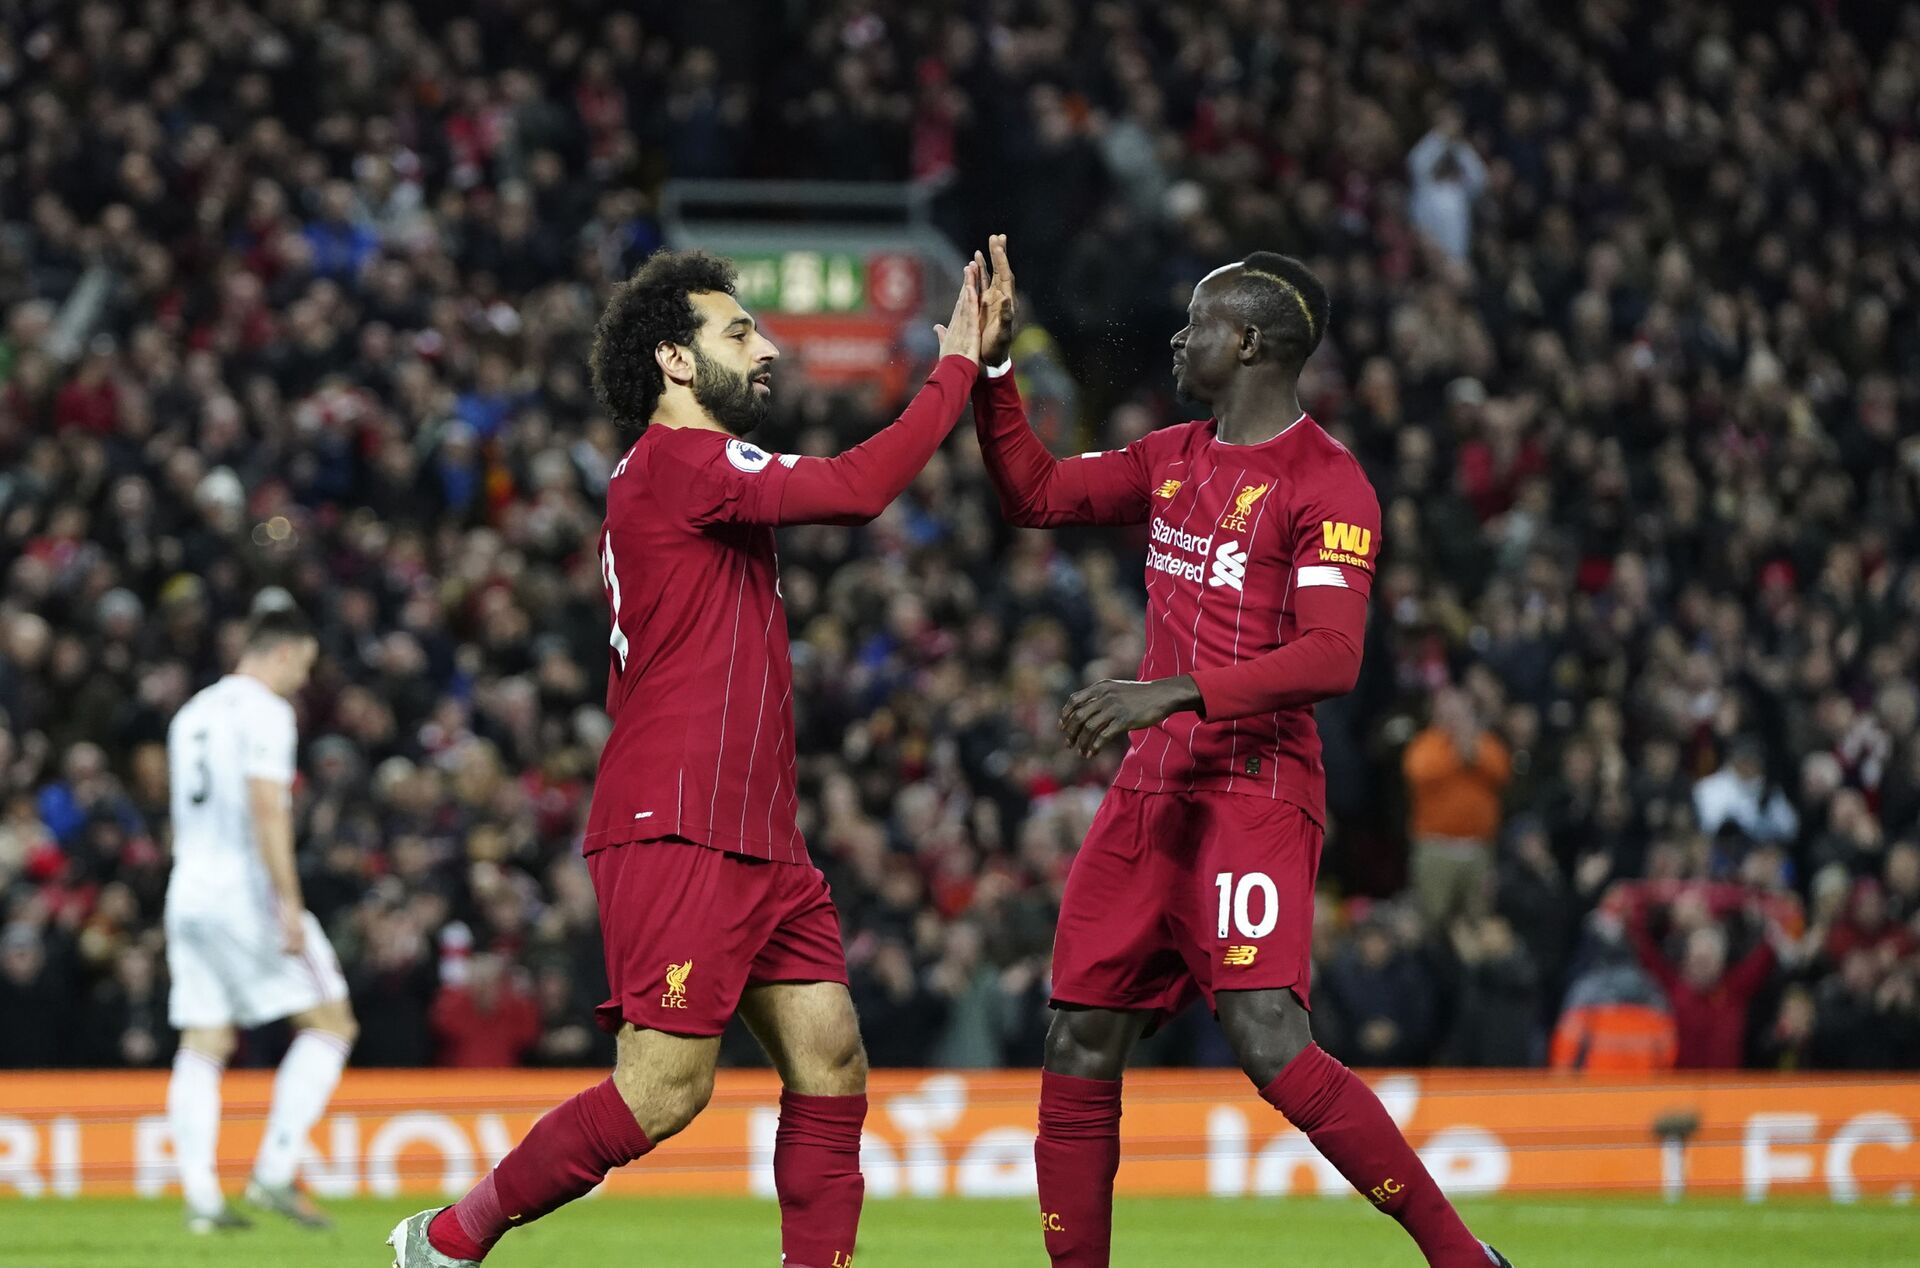 Liverpool's Mohamed Salah, front left, celebrates with Liverpool's Sadio Mane after scoring his side's opening goal during the English Premier League soccer match between Liverpool and Sheffield United at Anfield Stadium, Liverpool, England, Thursday, Jan. 2, 2020 - Sputnik International, 1920, 25.09.2021